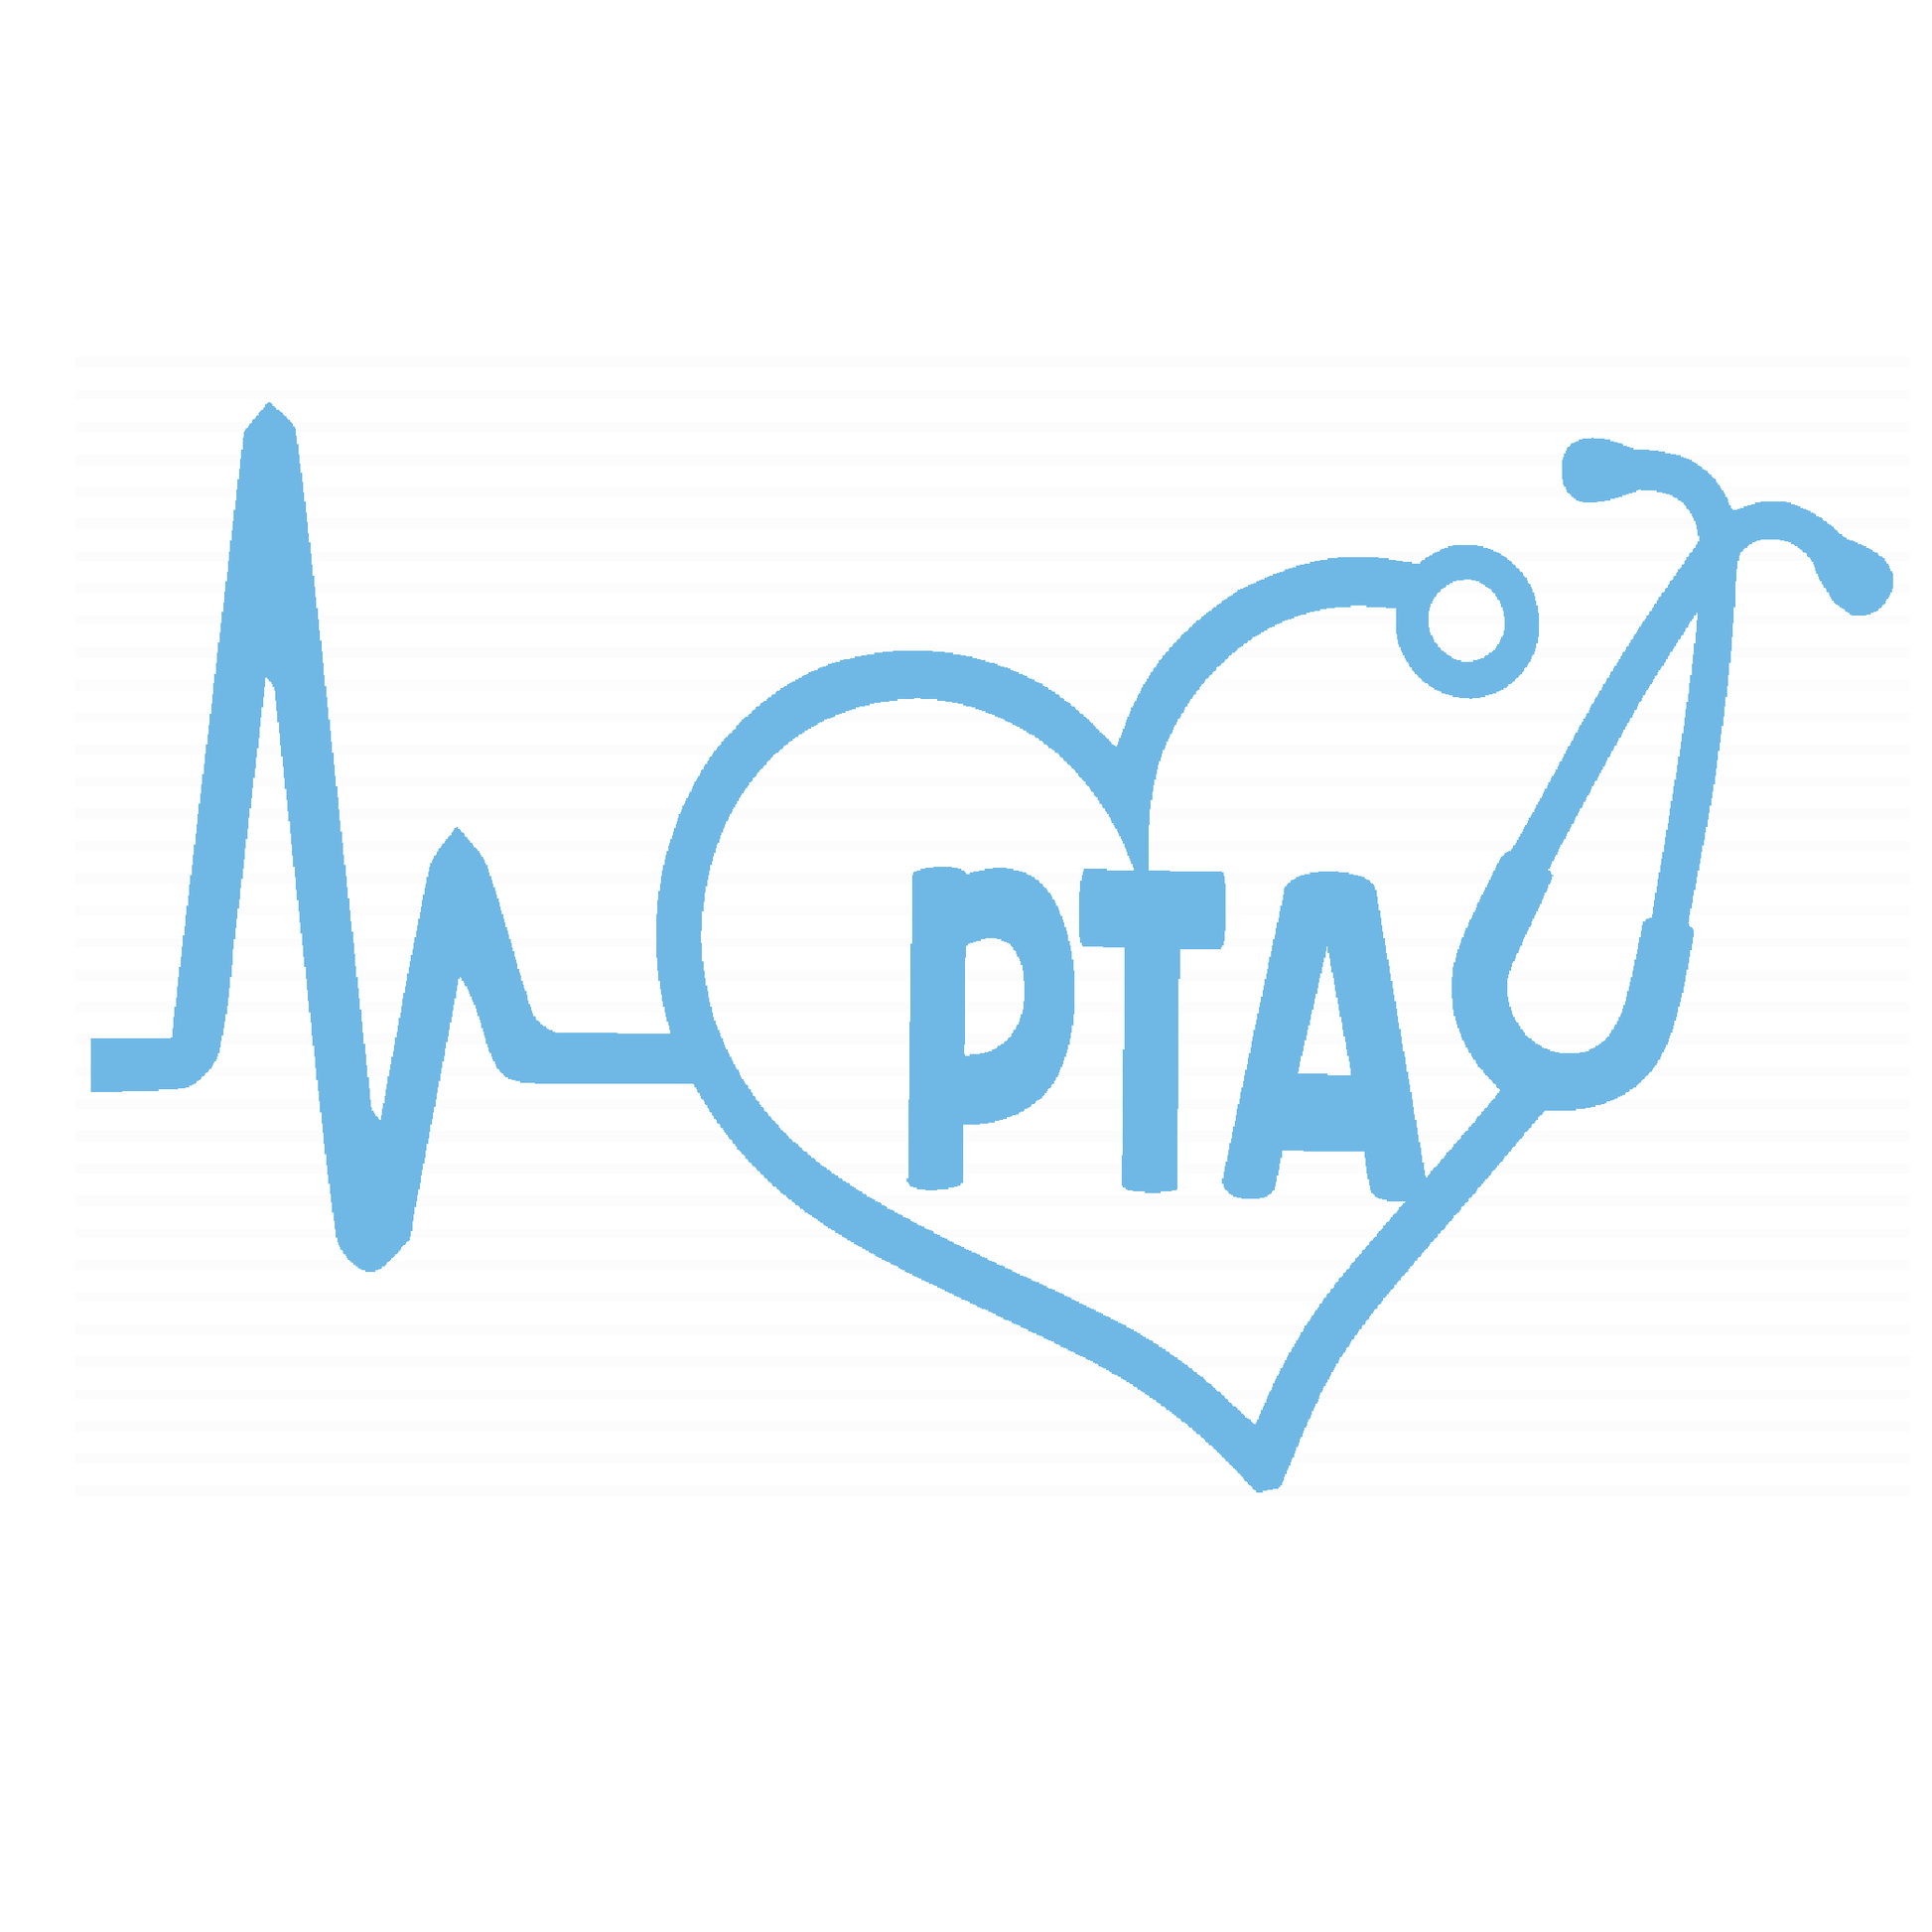 ShopVinylDesignStore.com Heartbeat PTA for Physical Therapist Assistant Wide Shop Vinyl Design decals stickers